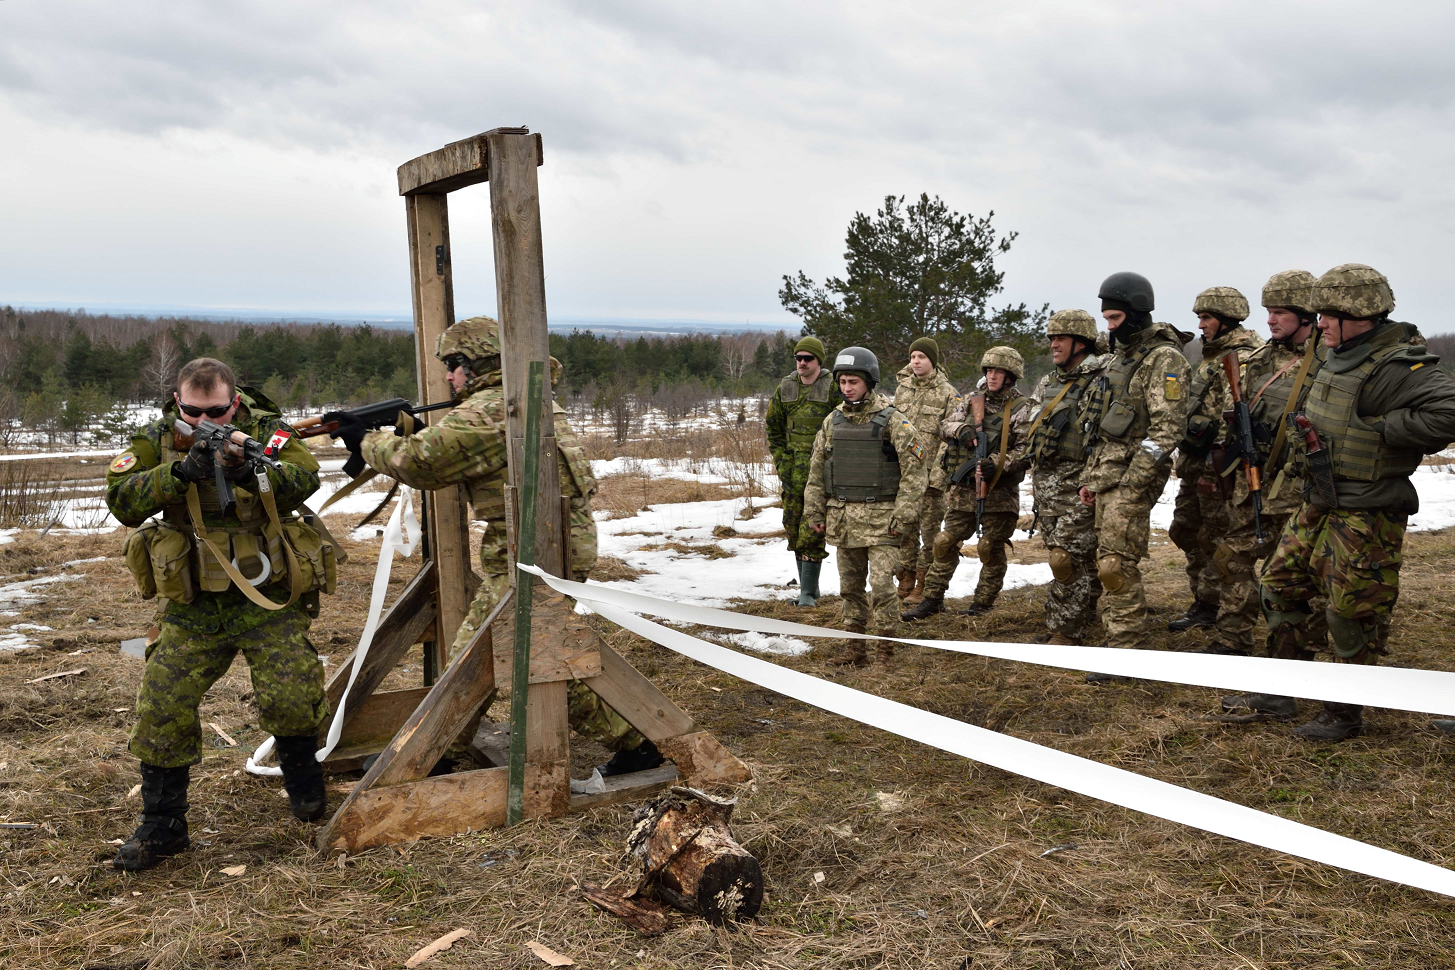 February 23, 2017. Canadian and American combat engineer instructors demonstrate door breaching and room clearing procedures to Ukrainian trainees at the International Peacekeeping and Security Centre in Starychi, Ukraine on February 23, 2017. (Photo: Joint Task Force – Ukraine)